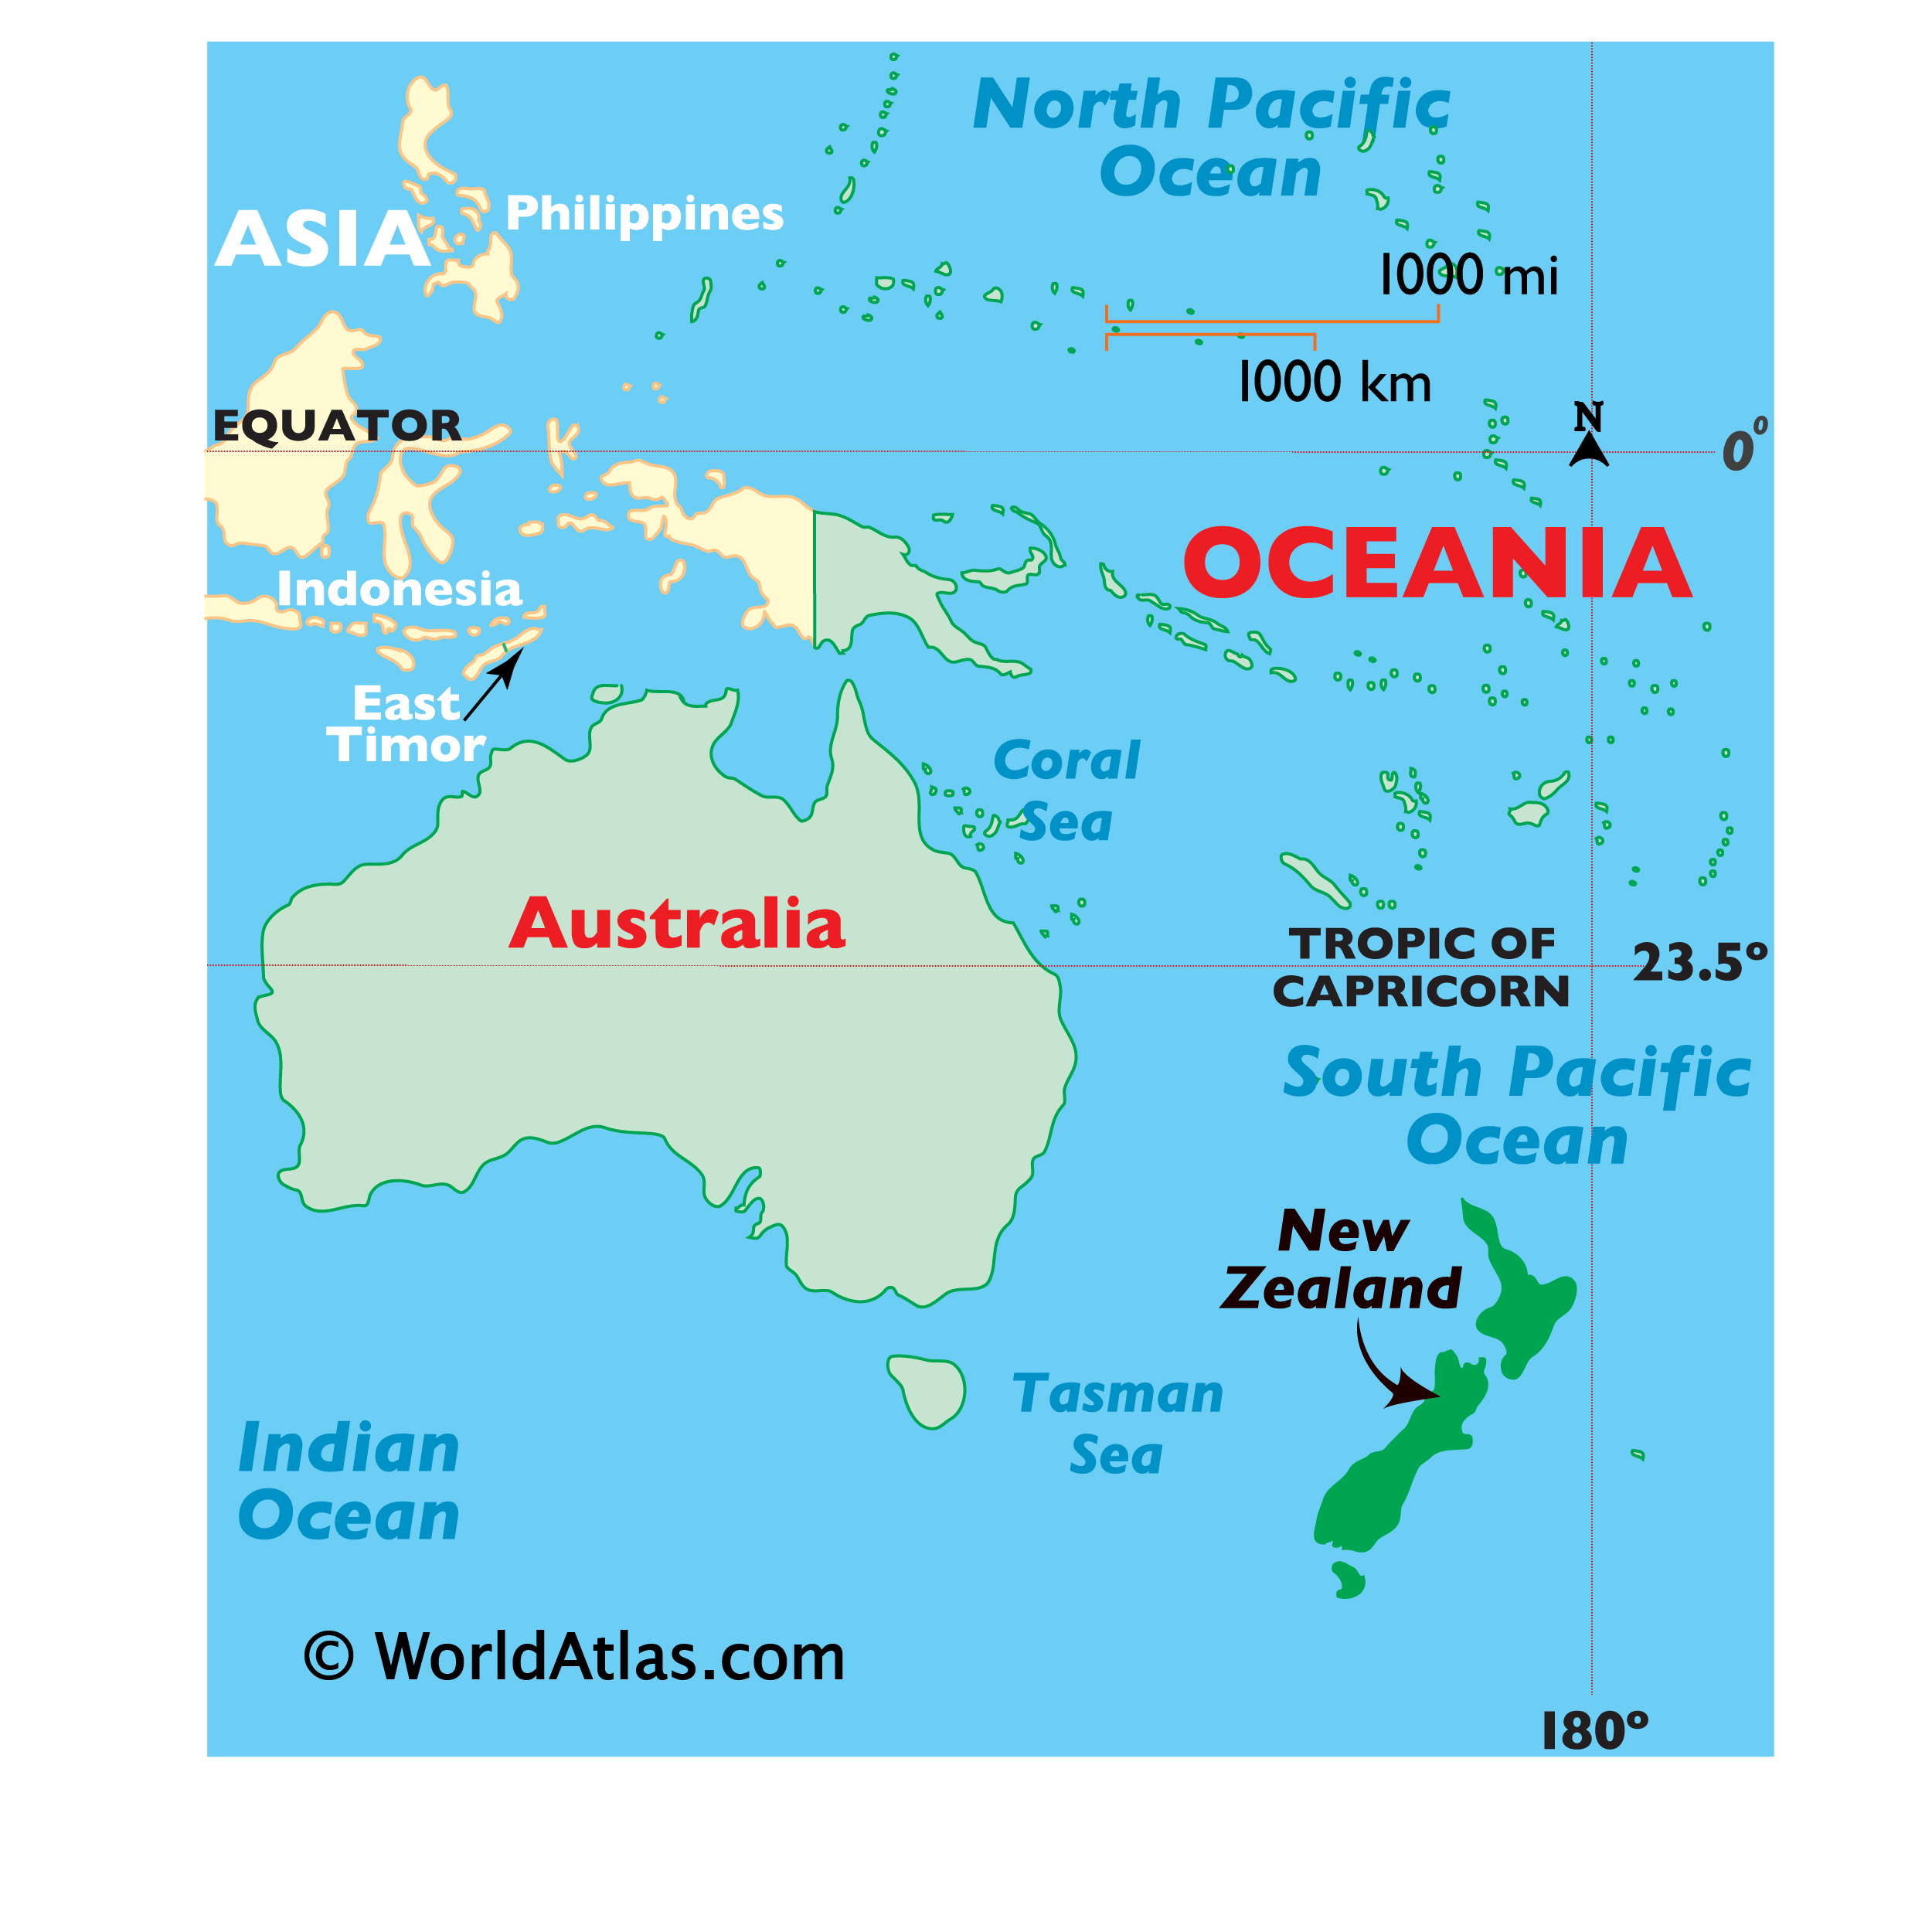 Map of New Zealand - New Zealand Map, Geography of New Zealand Map